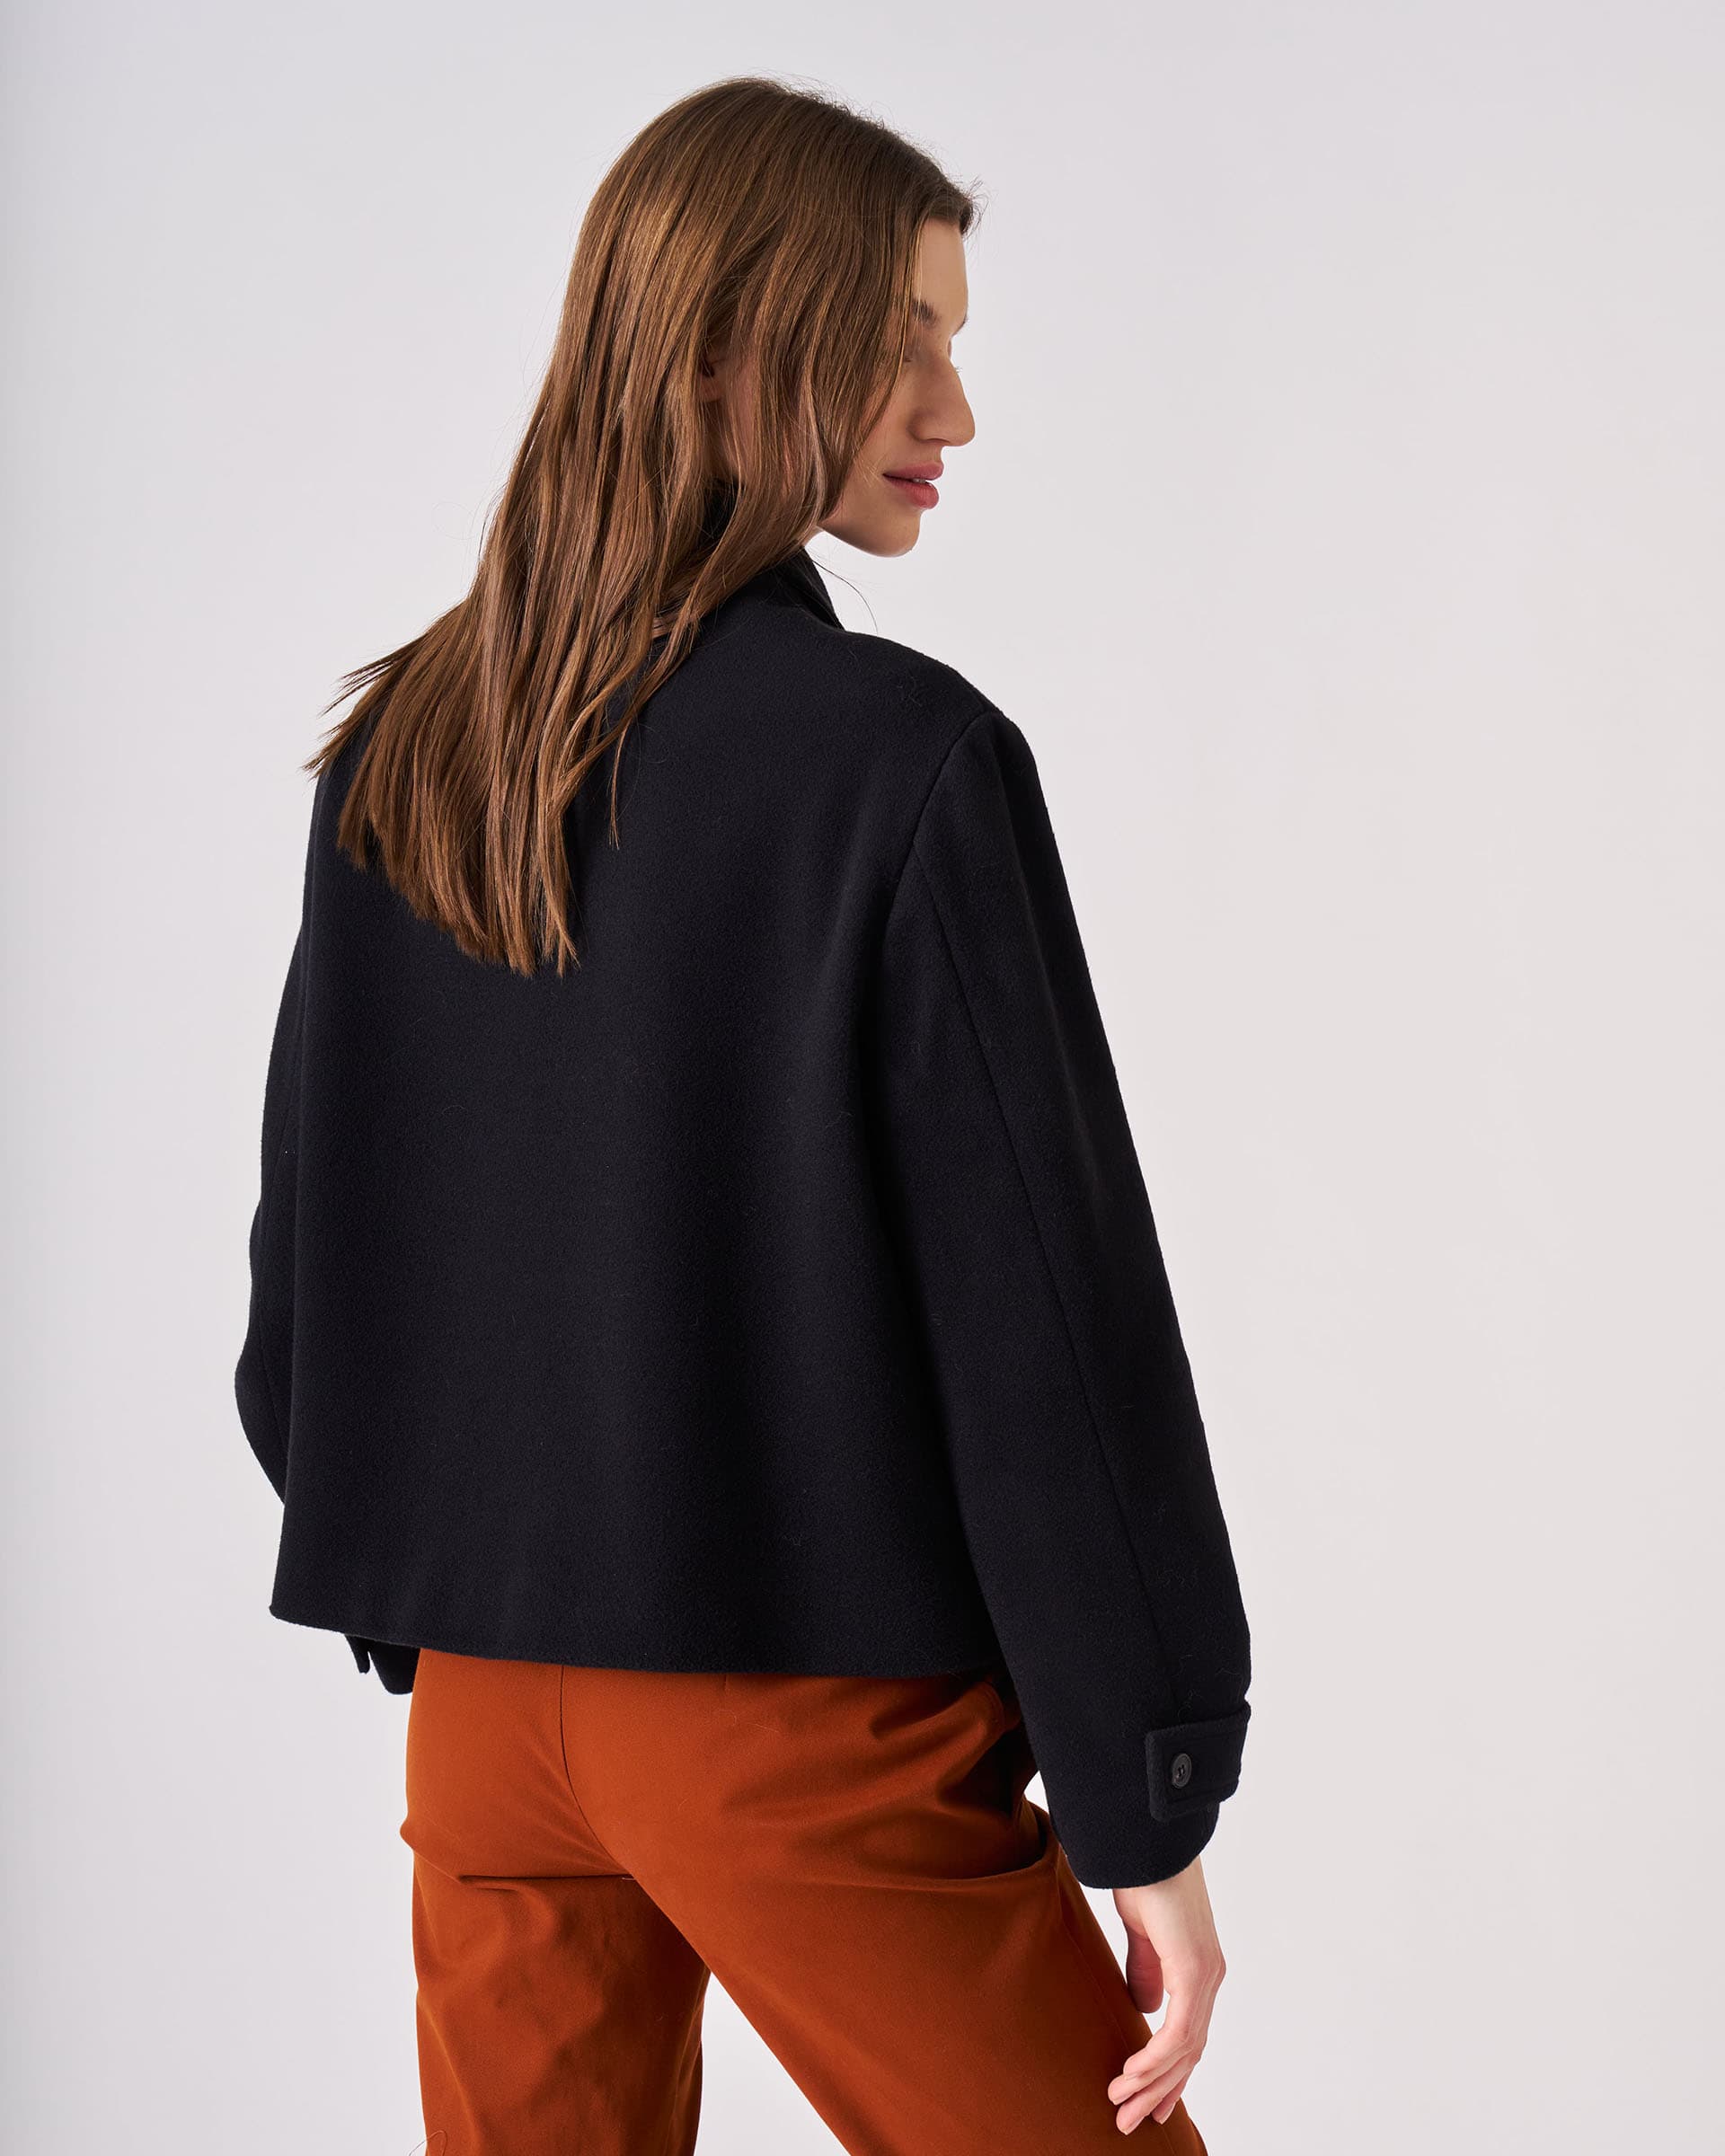 The Market Store | Jacket With Pockets